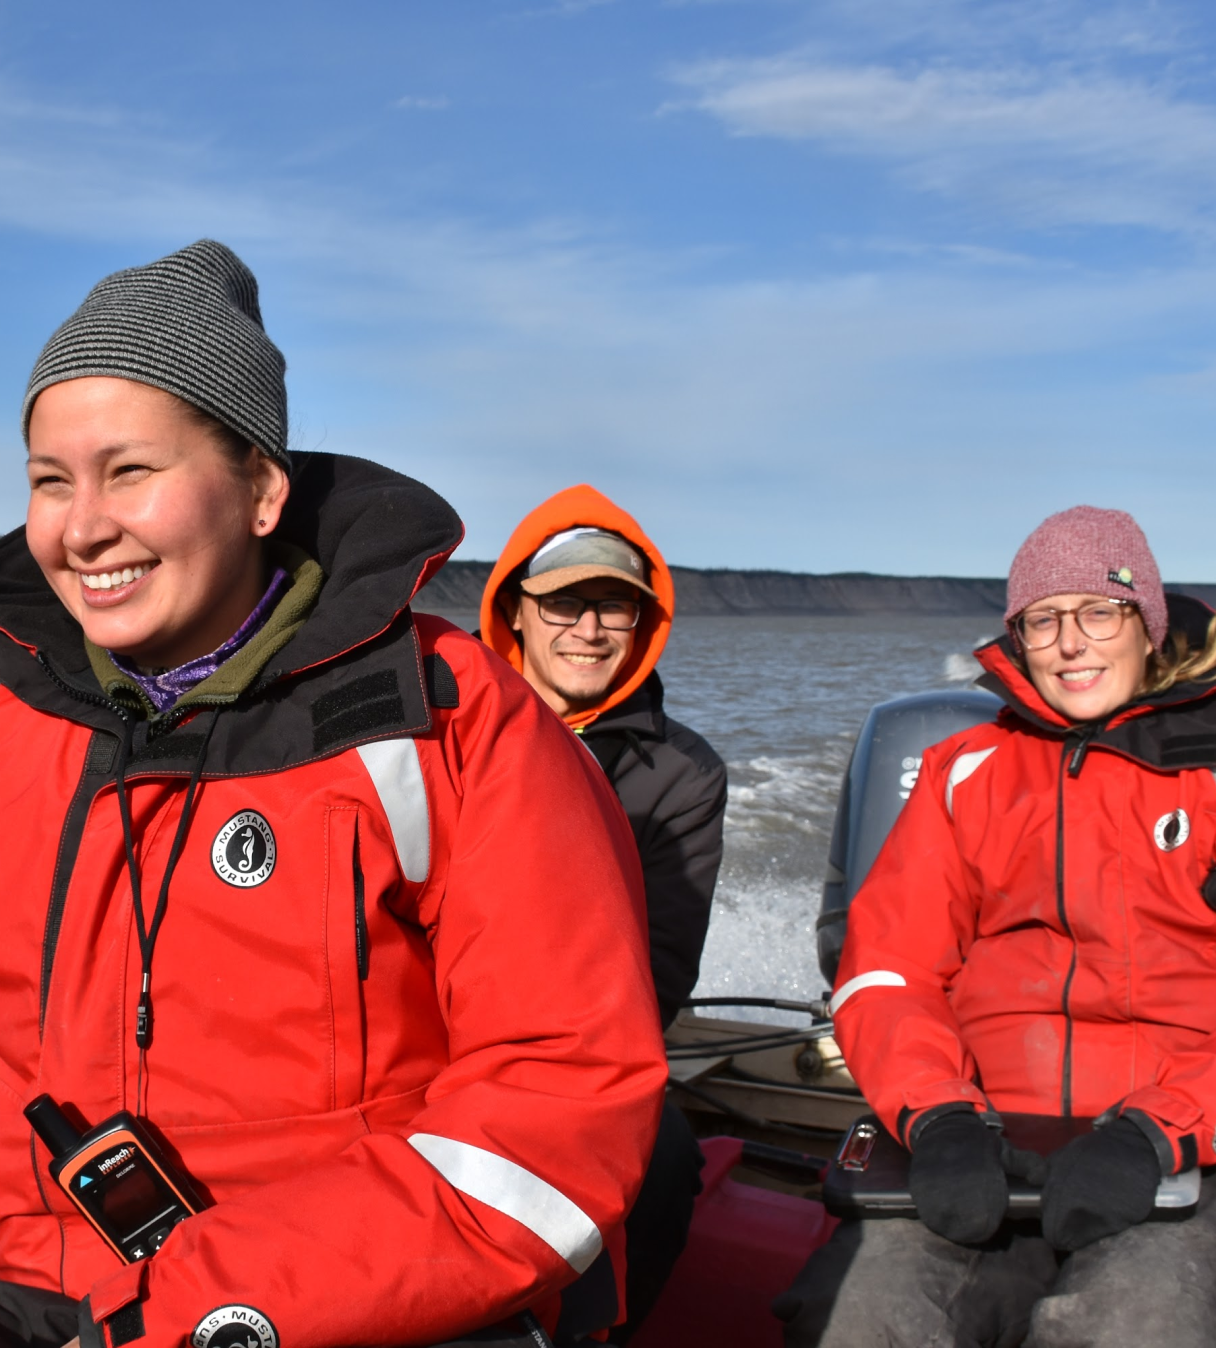 Gila Somers (Government of Northwest Territories) and others in a boat wearing safety vests.